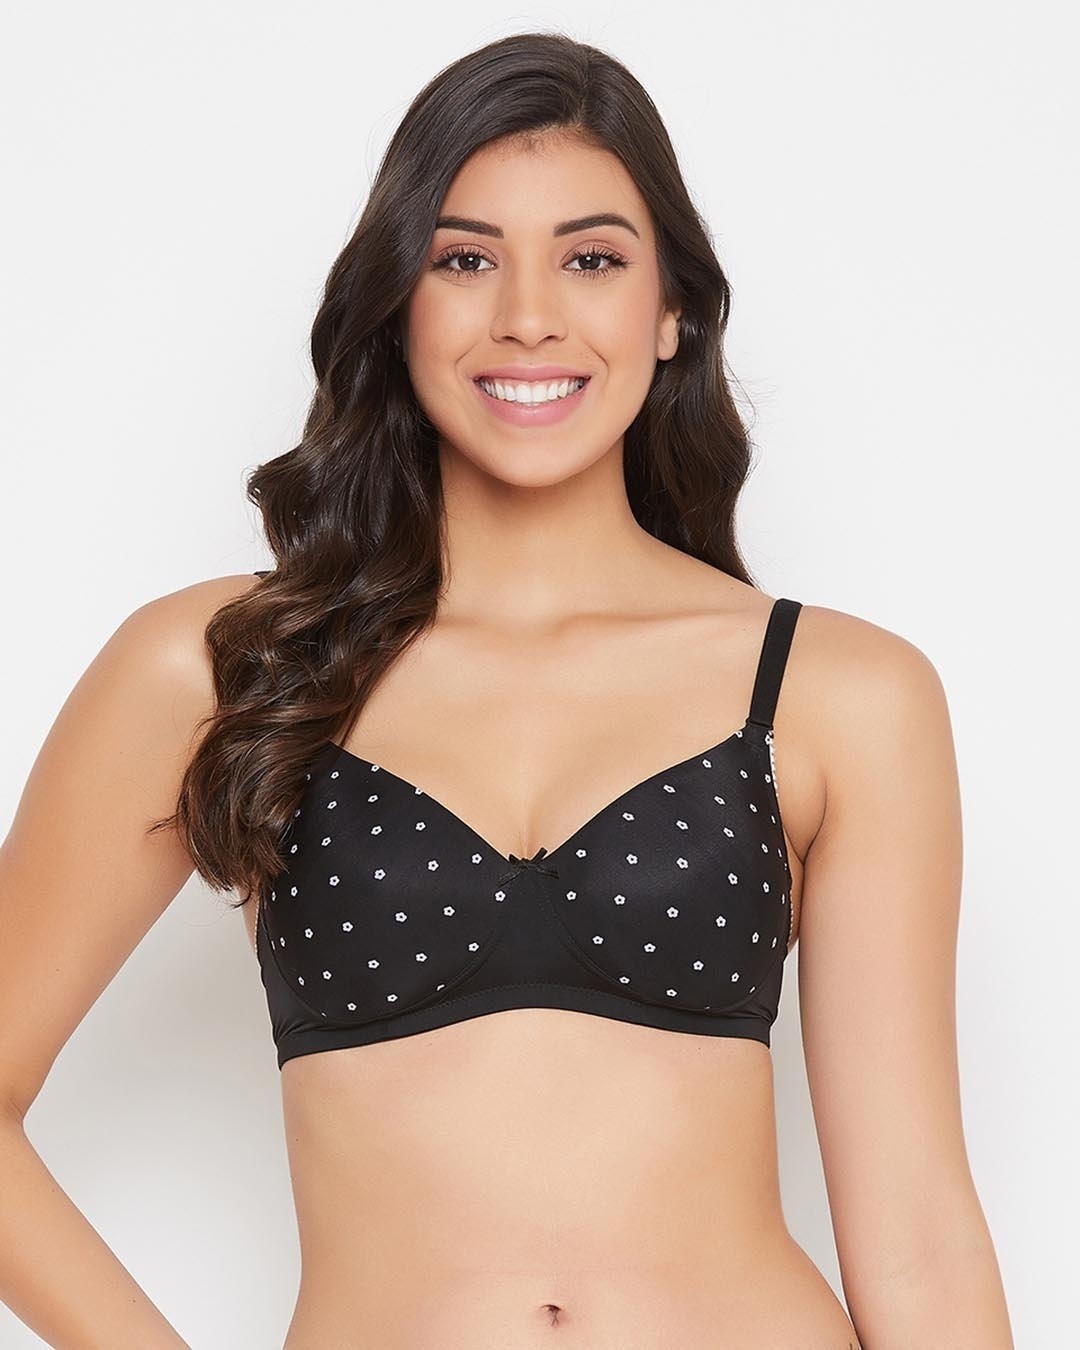 https://images.bewakoof.com/t1080/padded-non-wired-full-cup-floral-print-multiway-t-shirt-bra-in-black-356126-1656014364-1.jpg